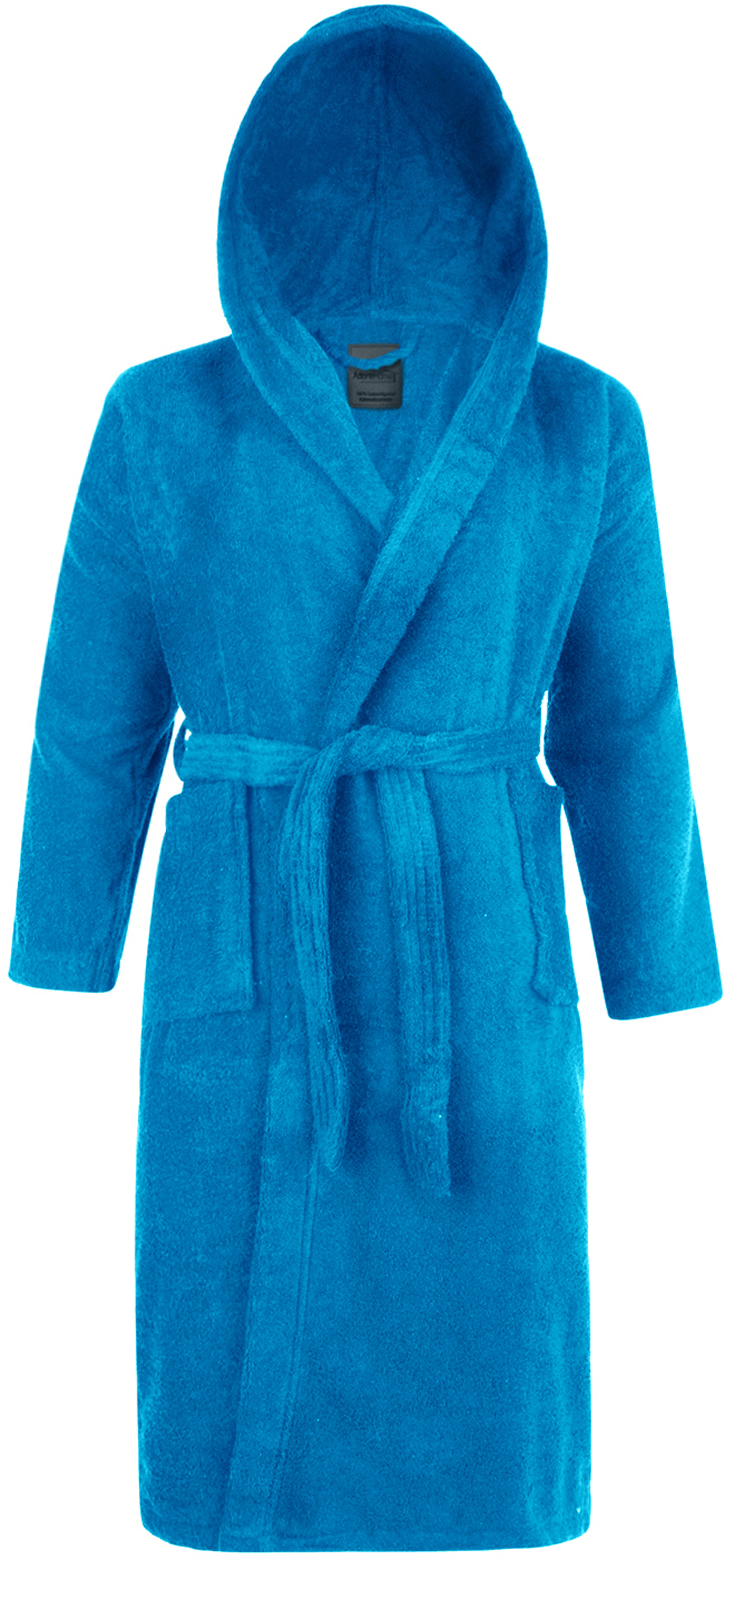 Highly Absorbent and Comfortable with Hood,Pockets,Betl Bassetti New Bath Robe Dressing Gown Towelling Unisex Super Soft 100% Pure Cotton Sponge Solid Color,Several Size S-5XL 